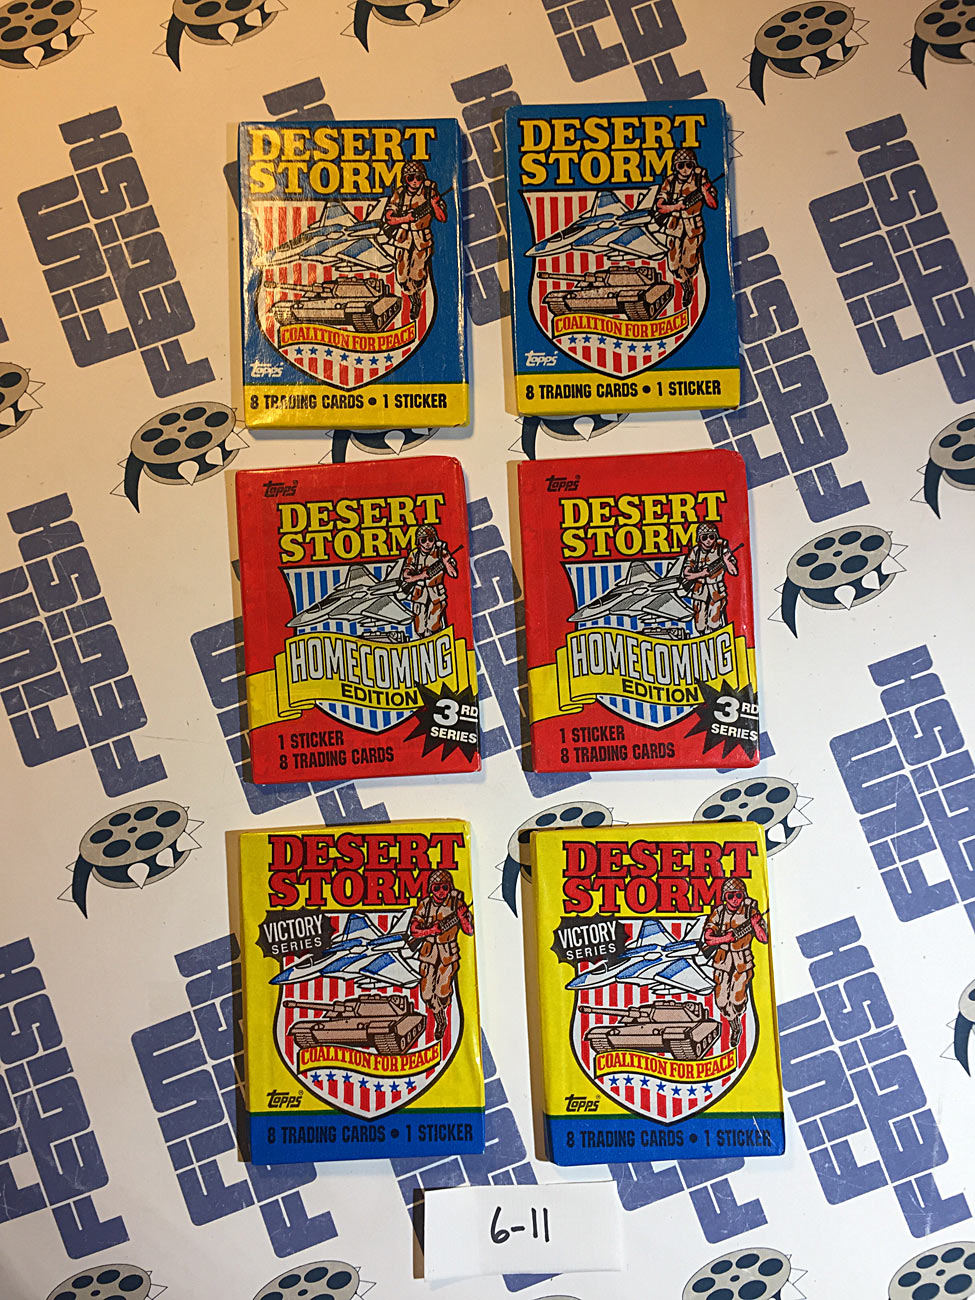 Set of 6 Sealed Topps Desert Storm Trading Card Wax Packs, Homecoming, Coalition For Peace, Victory Series [611]